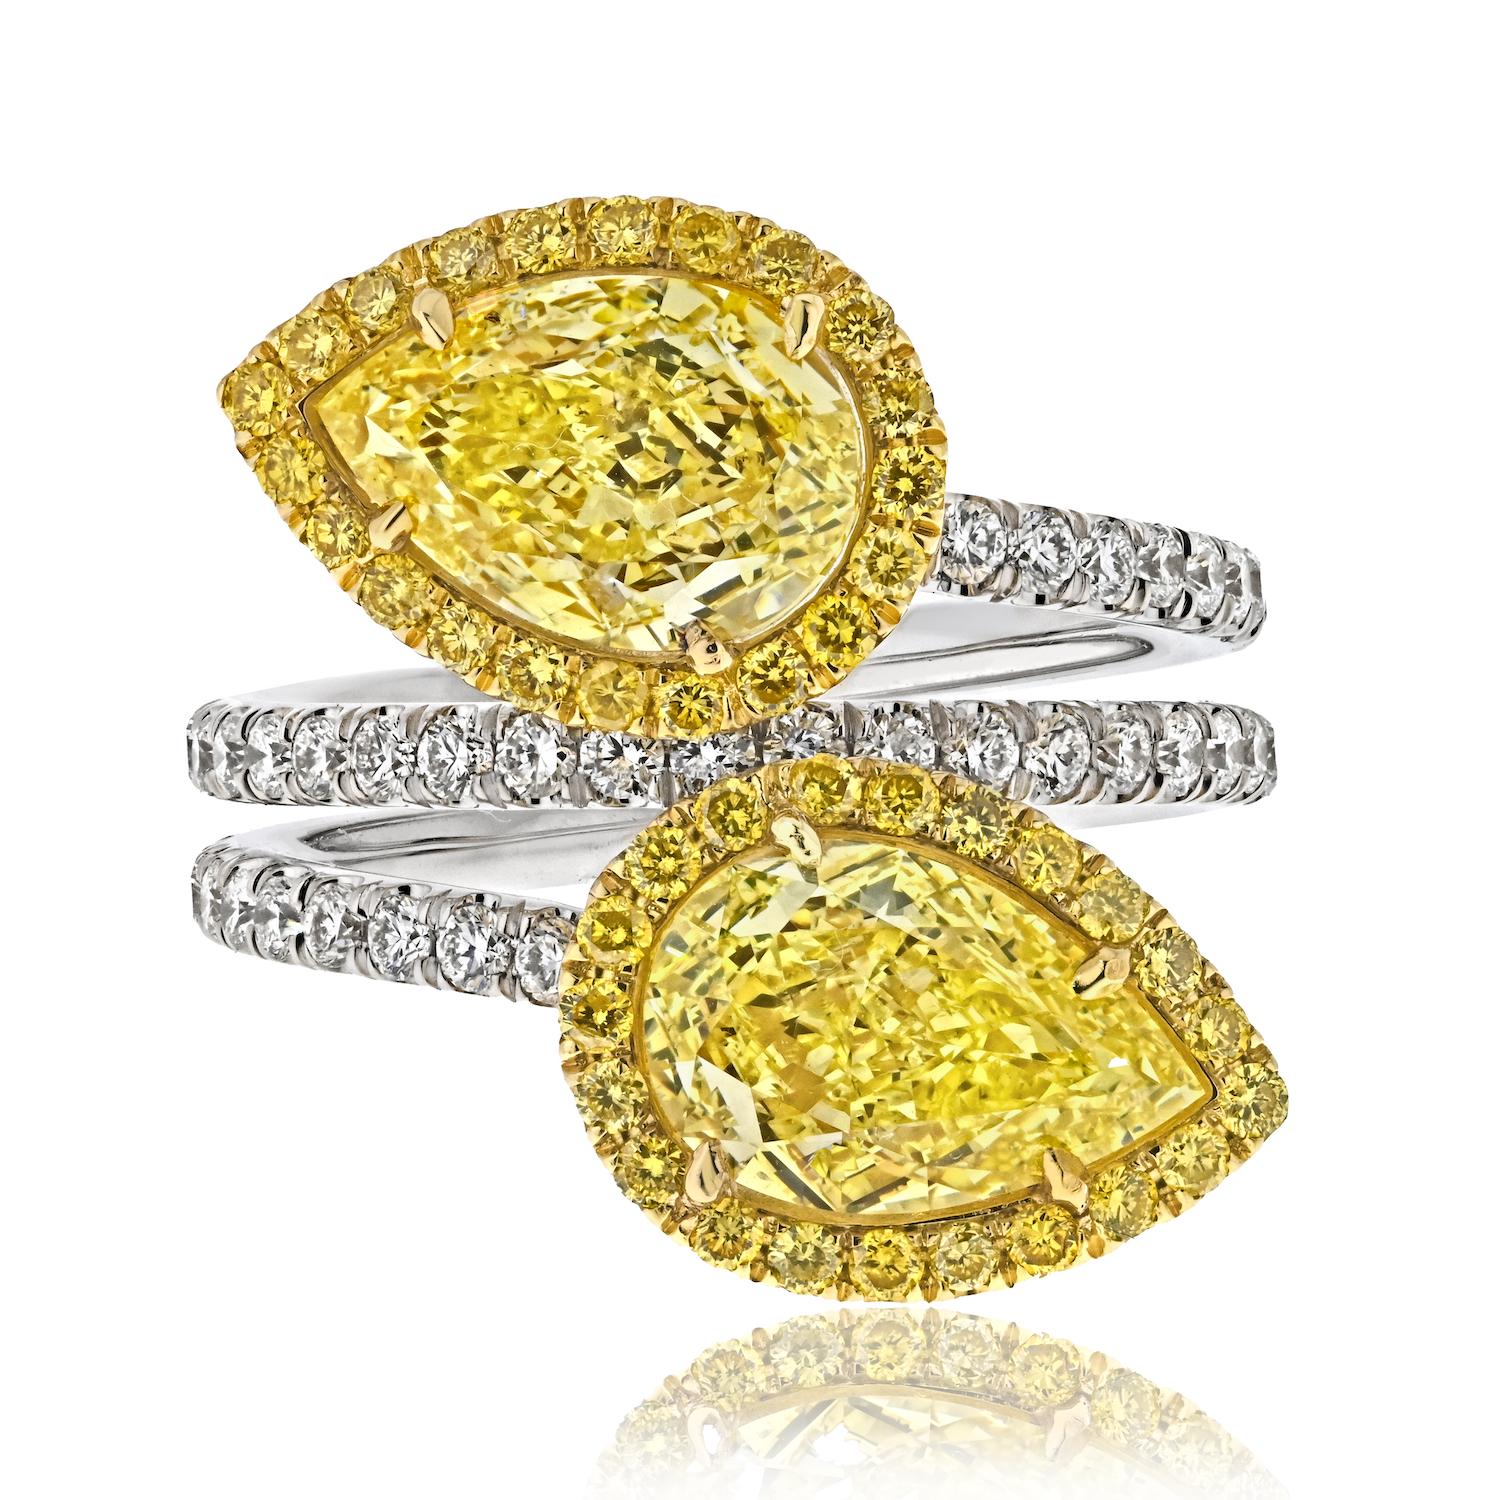 Experience the exquisite union of elegance and love with our Twogether Two Stone Pear Cut Diamond Ring, a celebration of two hearts coming together as one. This exceptional ring features two magnificent GIA certified pear-shaped fancy yellow intense